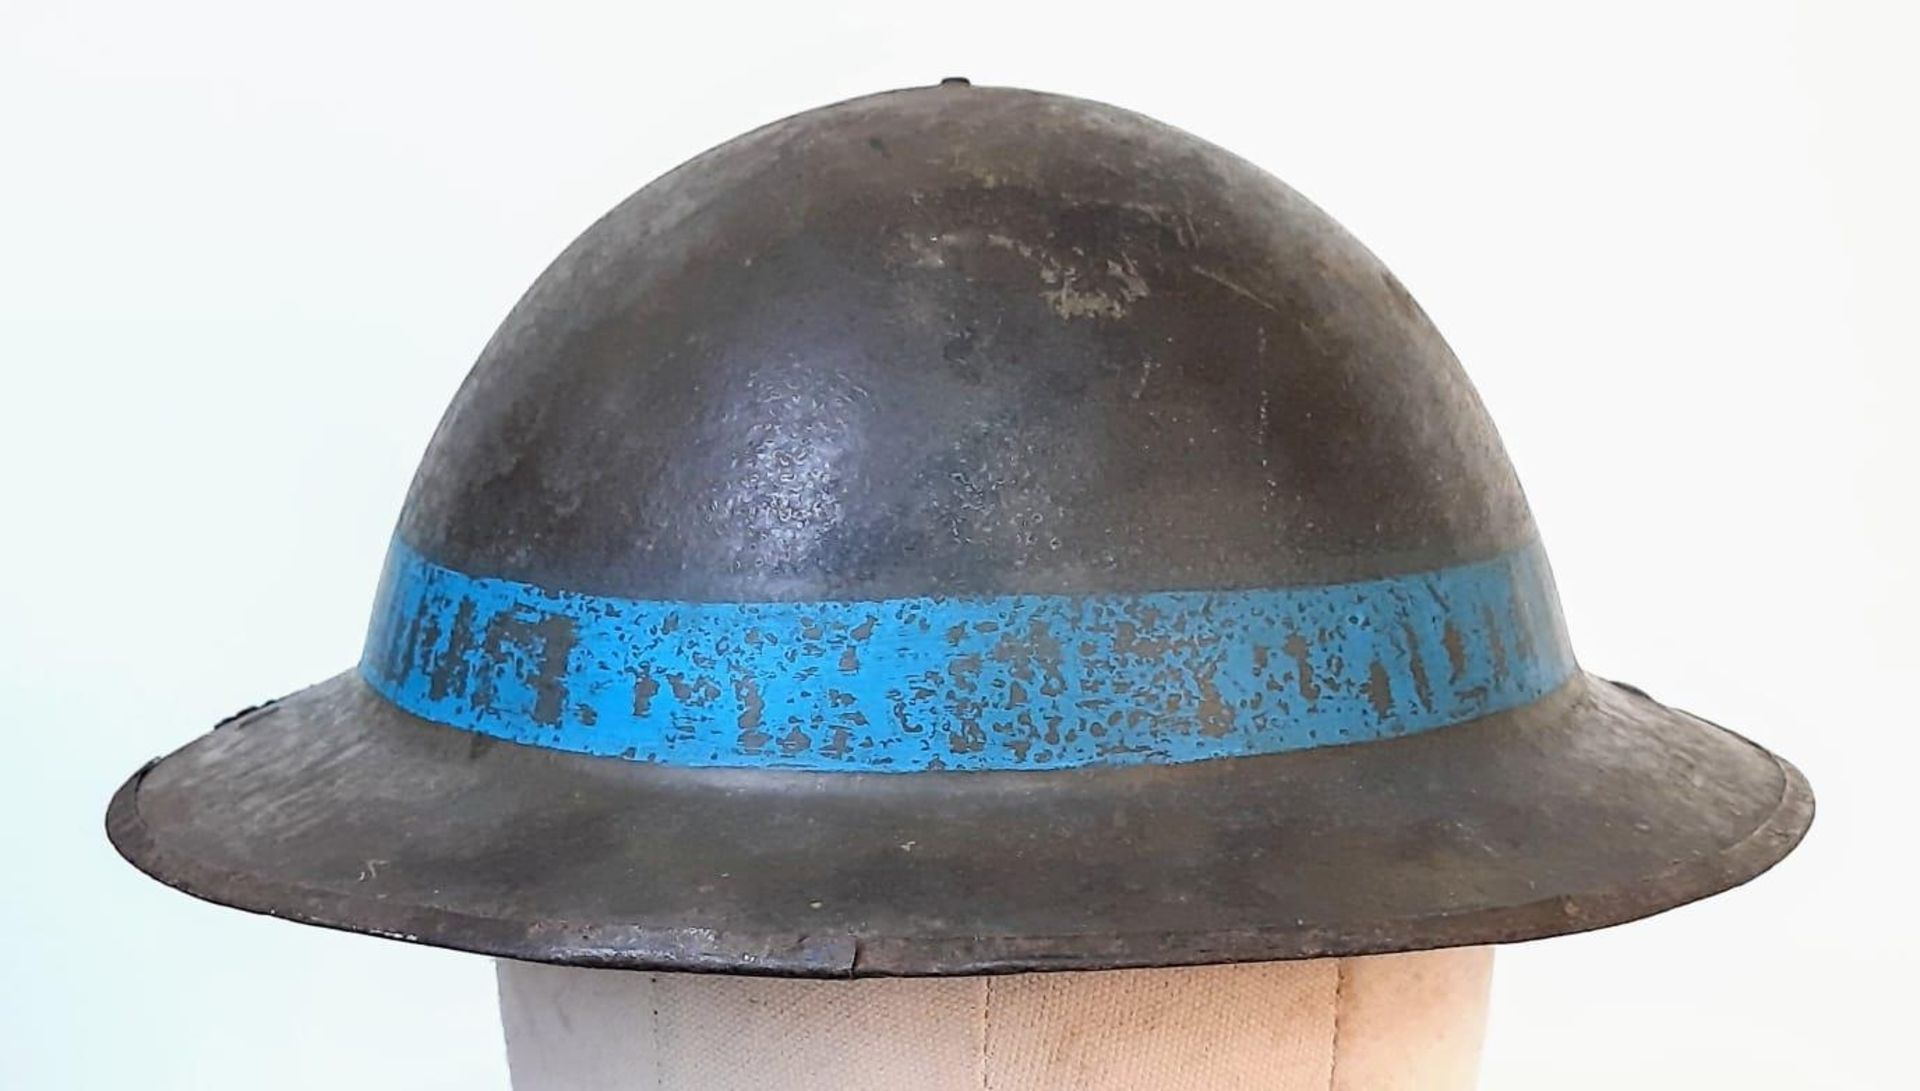 WW1 British Brodie Helmet with Blue Band for the 1st Bn East Yorks circa 1918. Lots of the - Bild 3 aus 7